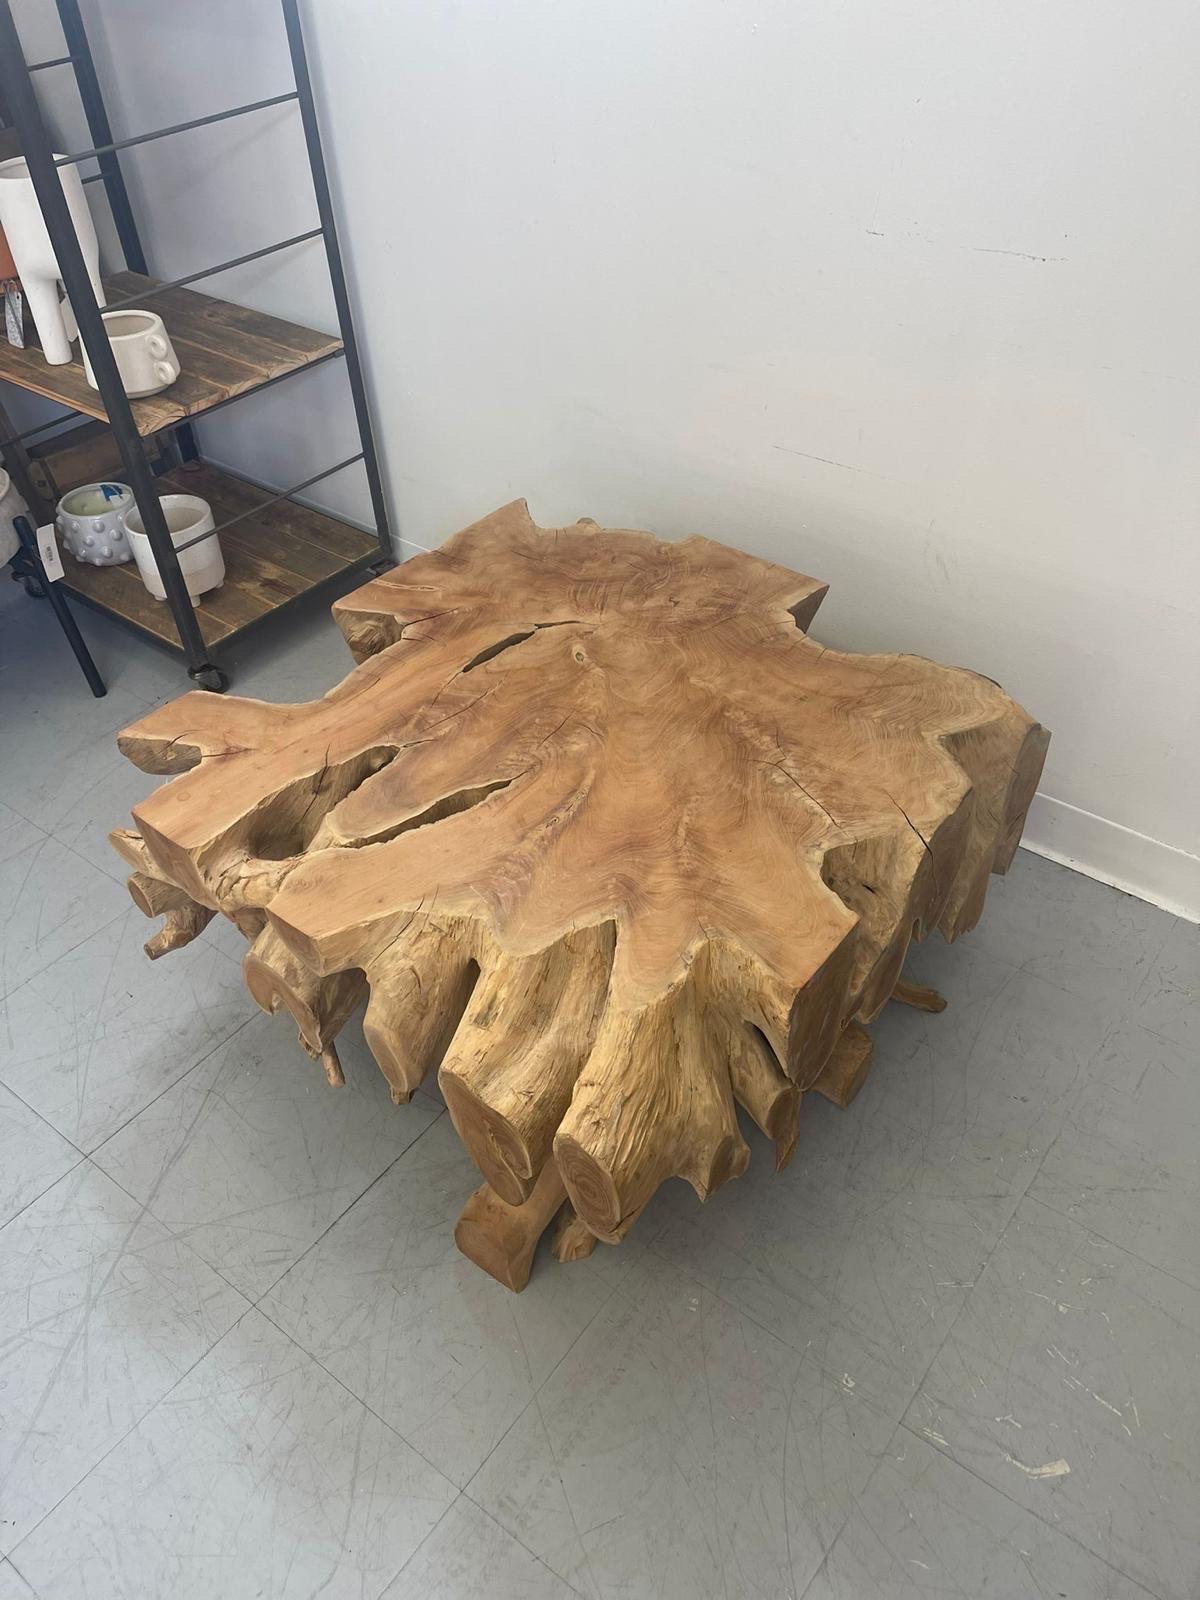 Live Edge Coffee or Accent Table with Natural Wood Grain Highlighted Throughout. Natural Markings, Like Knots,Lines,Splits,and Grain Patterns are Retained to Create an Organic one-of-a-Kind Look. 

Dimensions. 31 W ; 31 D ; 18 H